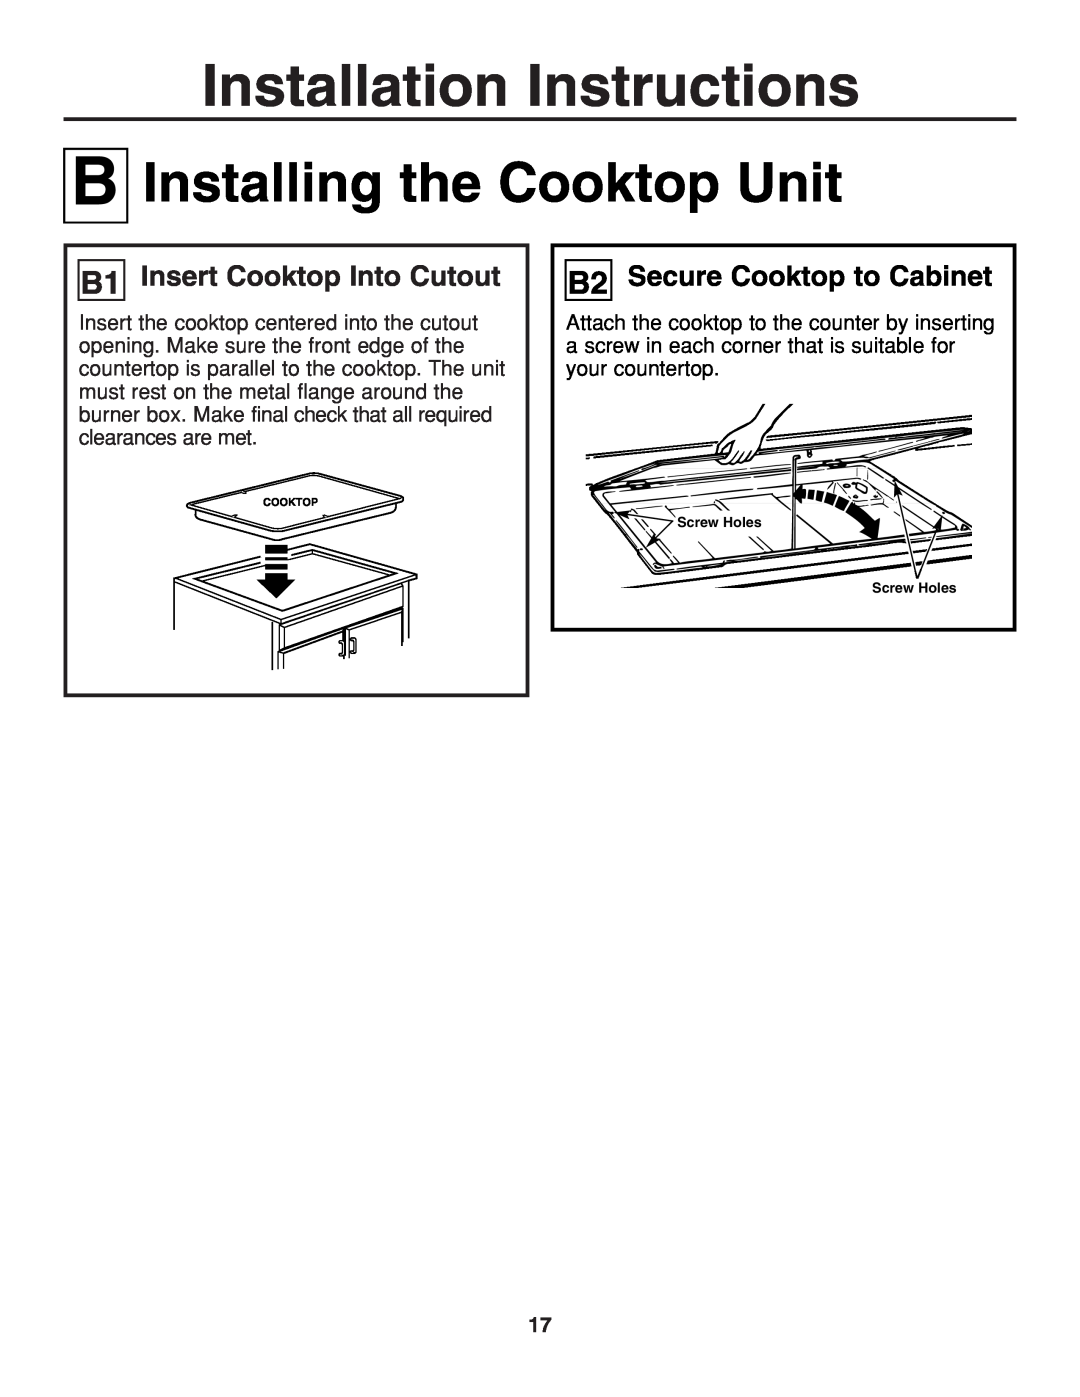 GE JGP321, JGP319 owner manual Installing the Cooktop Unit, B1 Insert Cooktop Into Cutout, B2 Secure Cooktop to Cabinet 